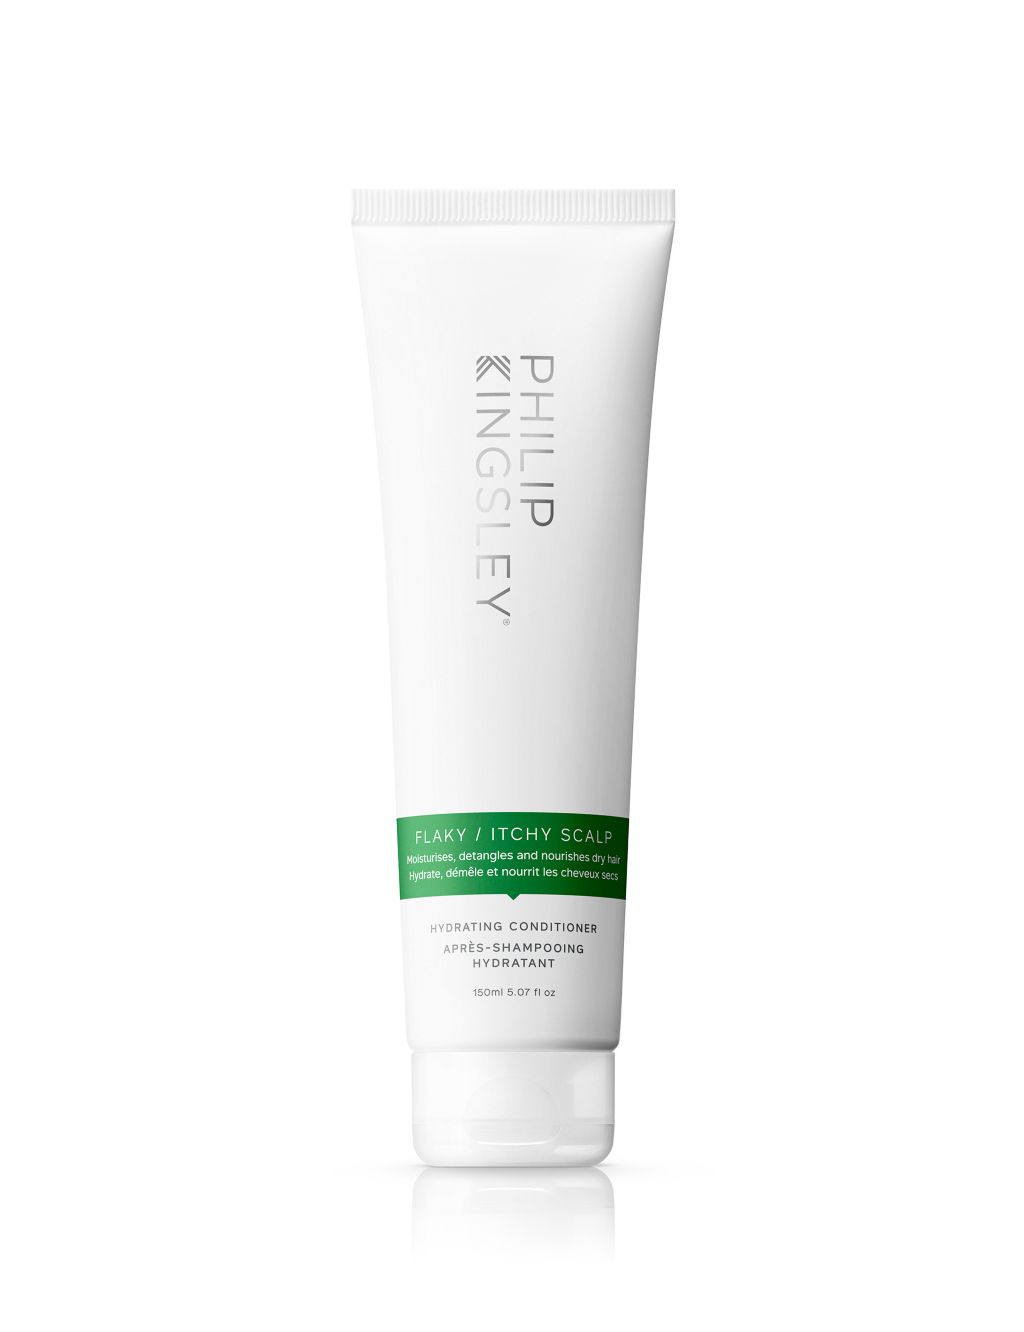 Flaky/Itchy Scalp Hydrating Conditioner